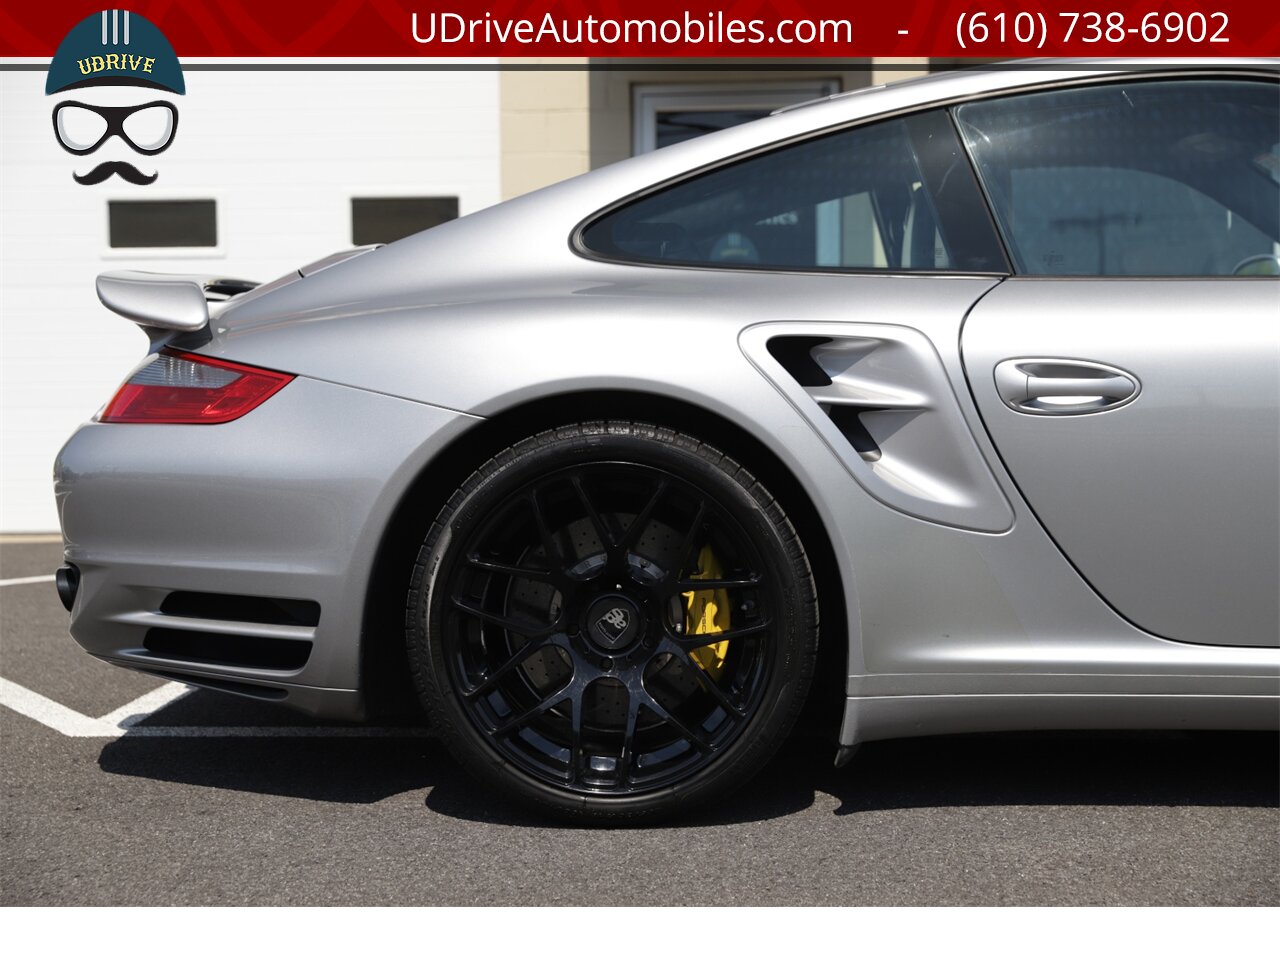 2008 Porsche 911 6 Speed Manual Turbo 997 PCCB's $149k MSRP   - Photo 17 - West Chester, PA 19382